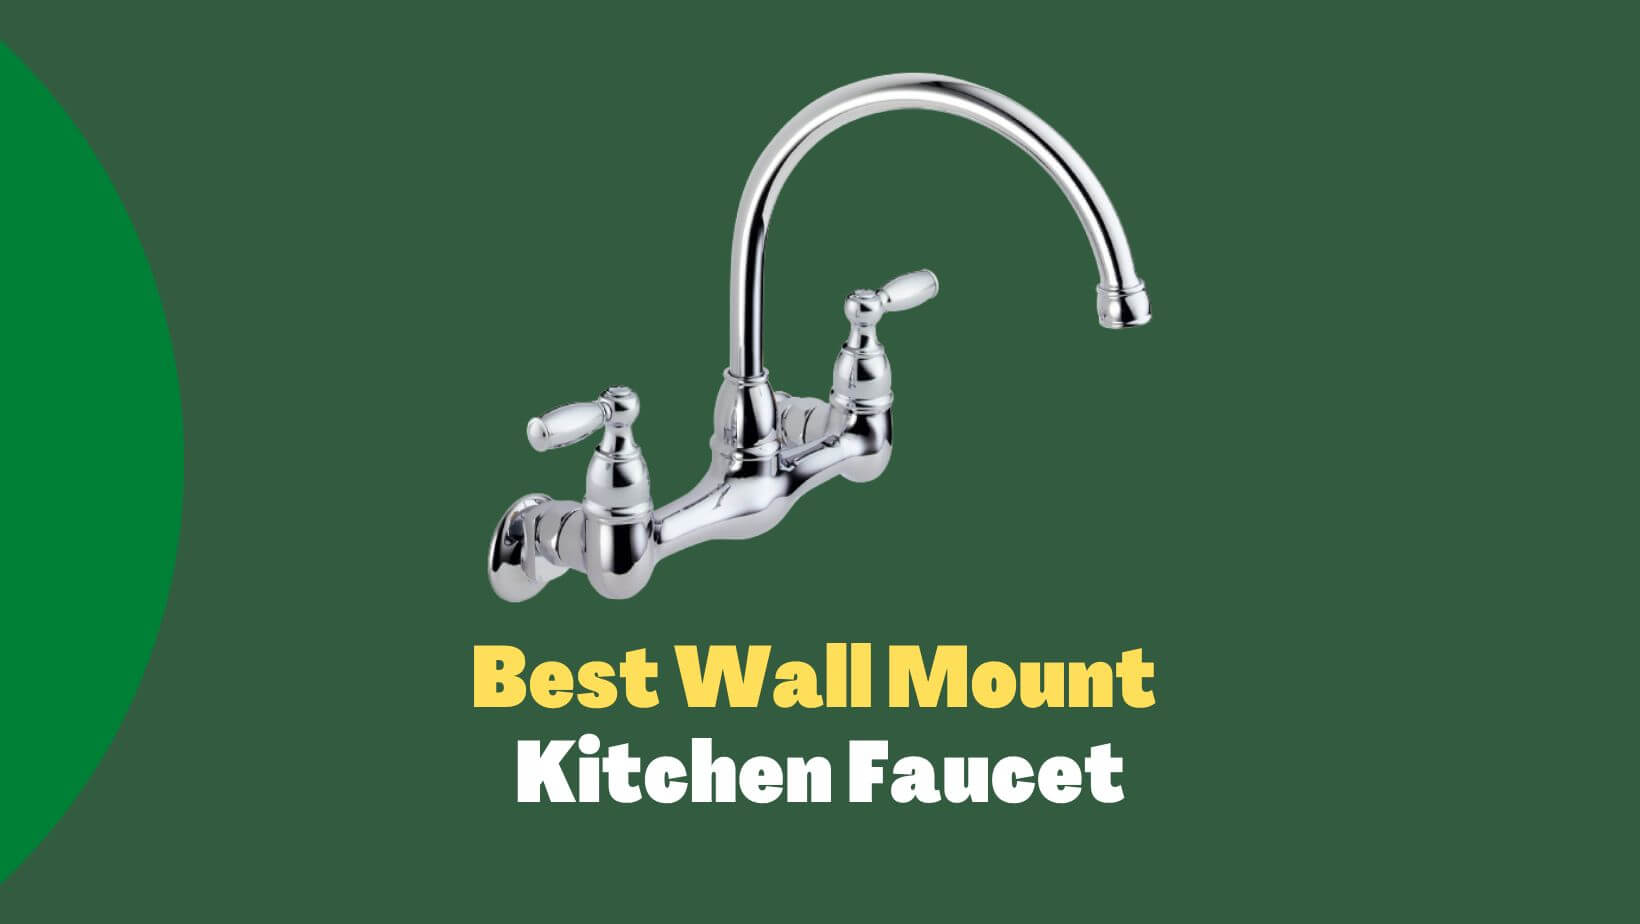 wall mount kitchen faucet male mouth